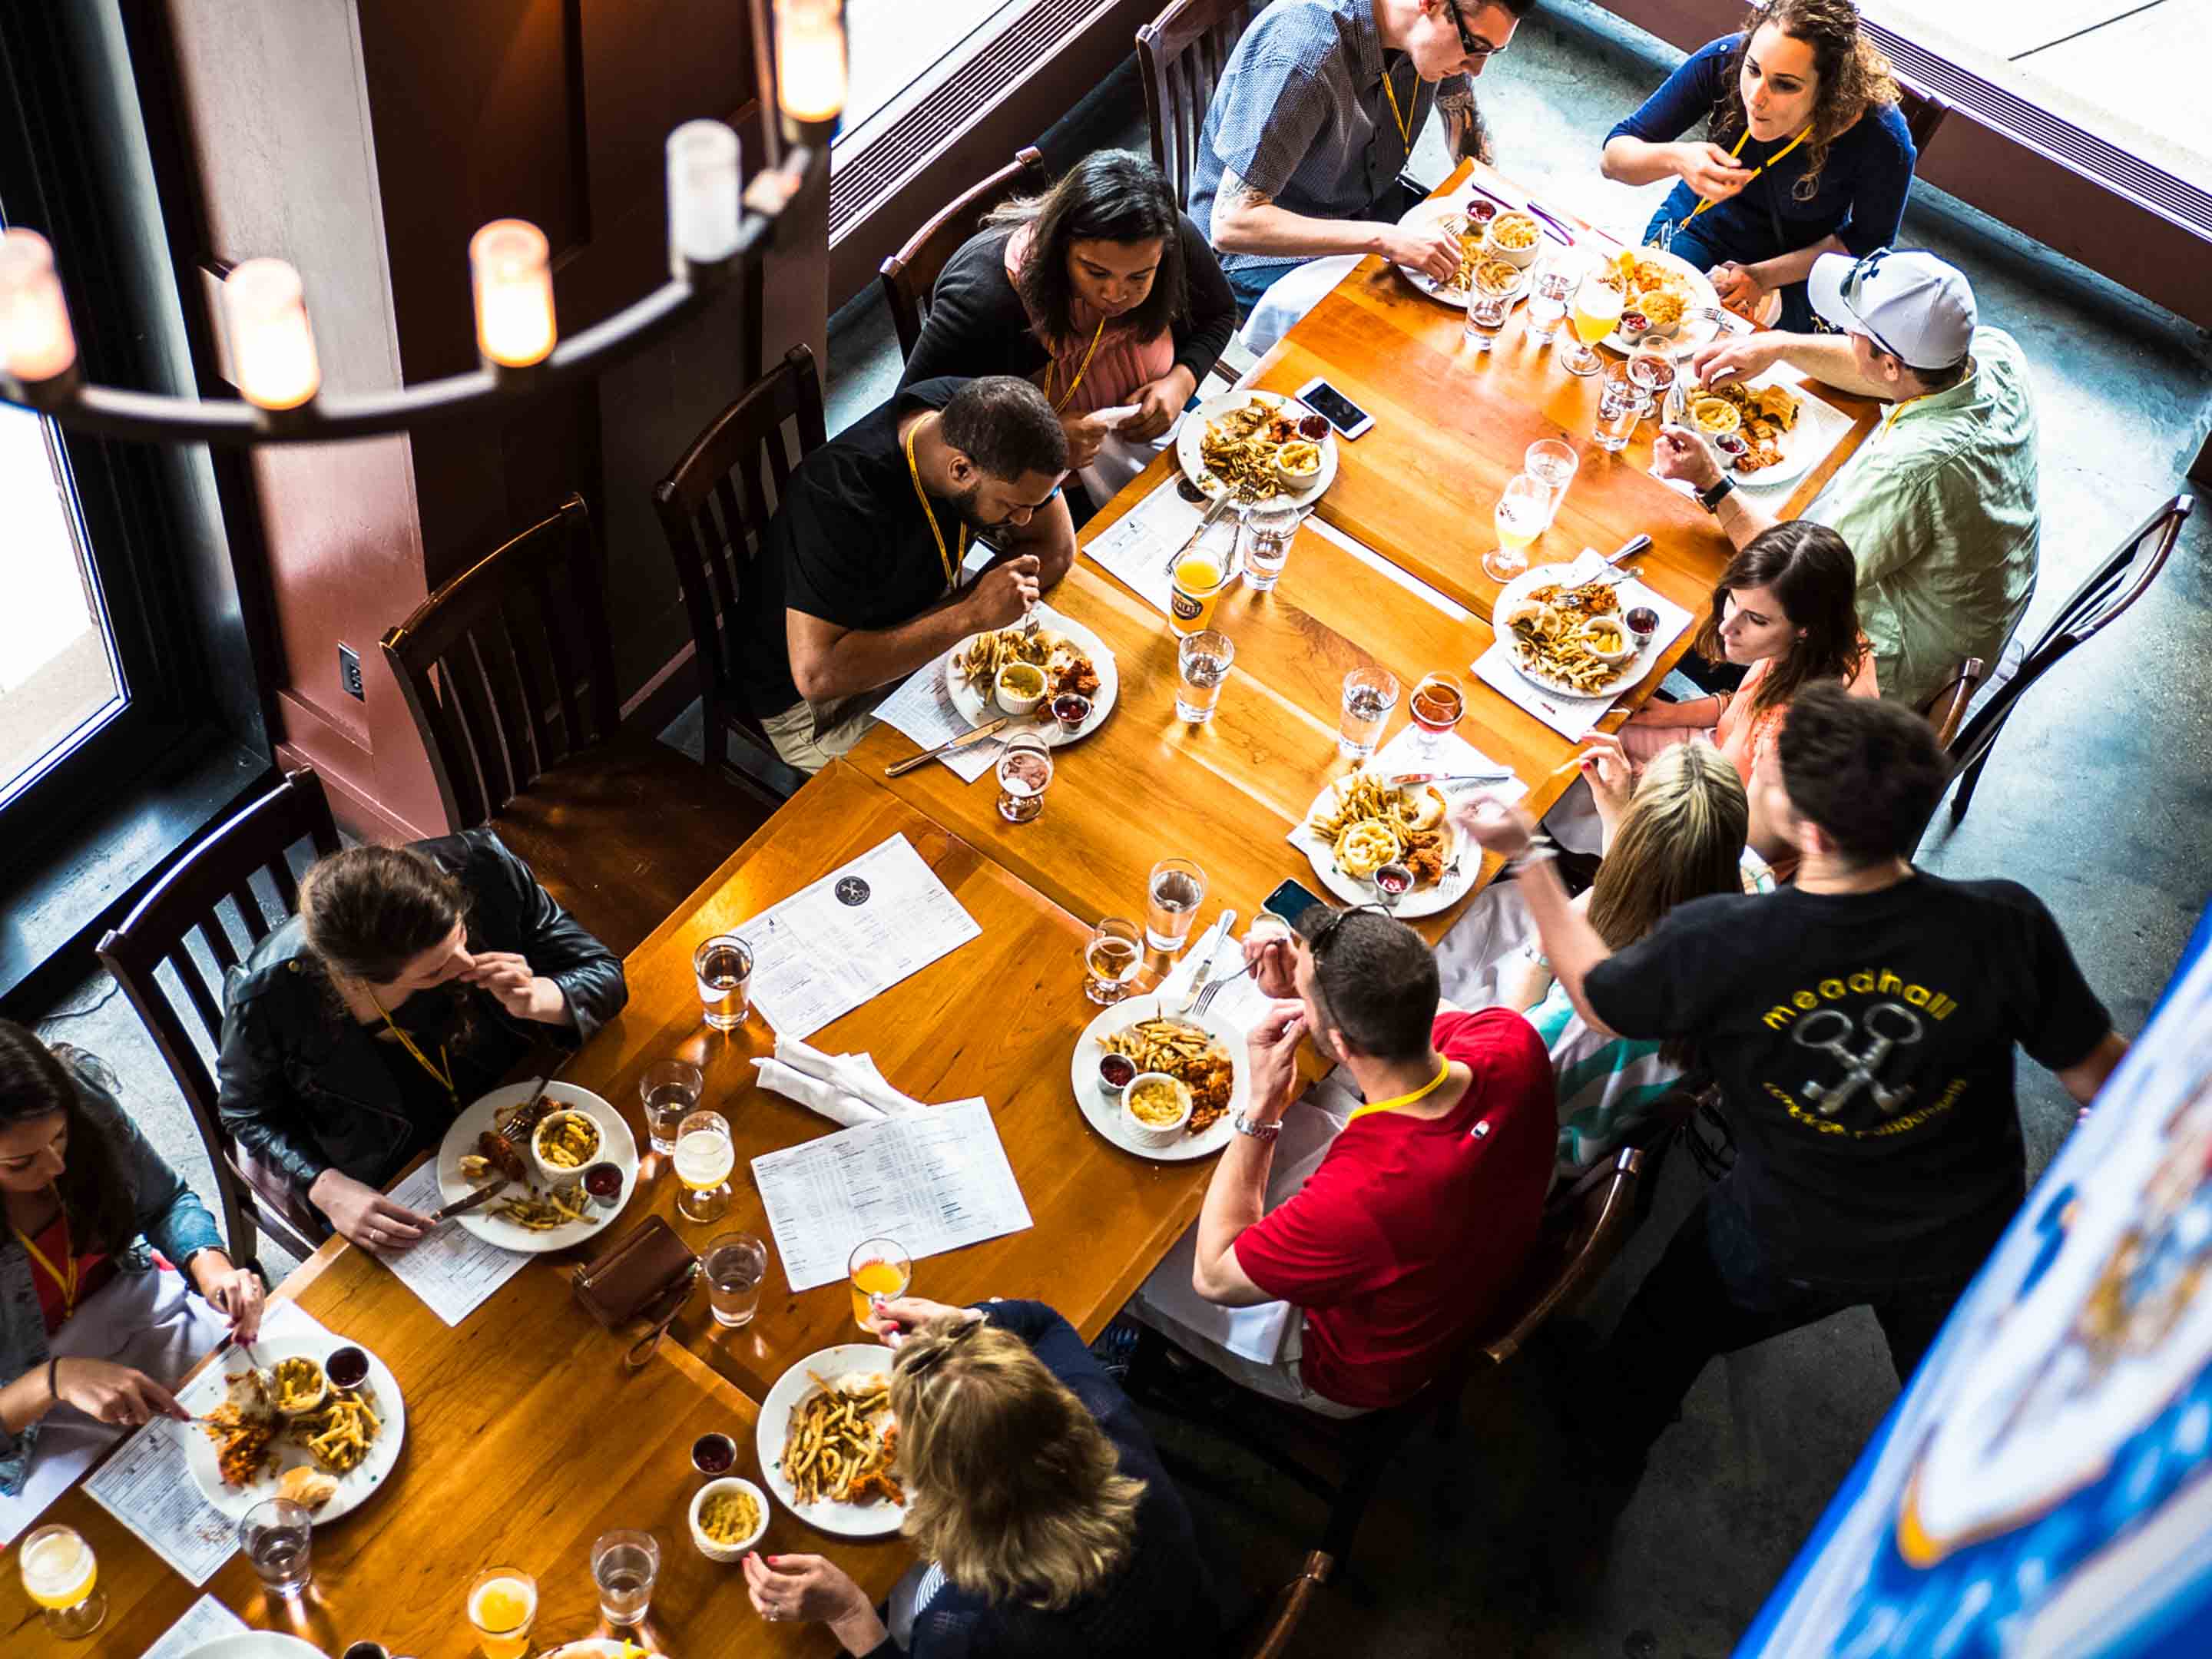 A Private Tour enjoys a meal and beer pairing on their City Brew Tour